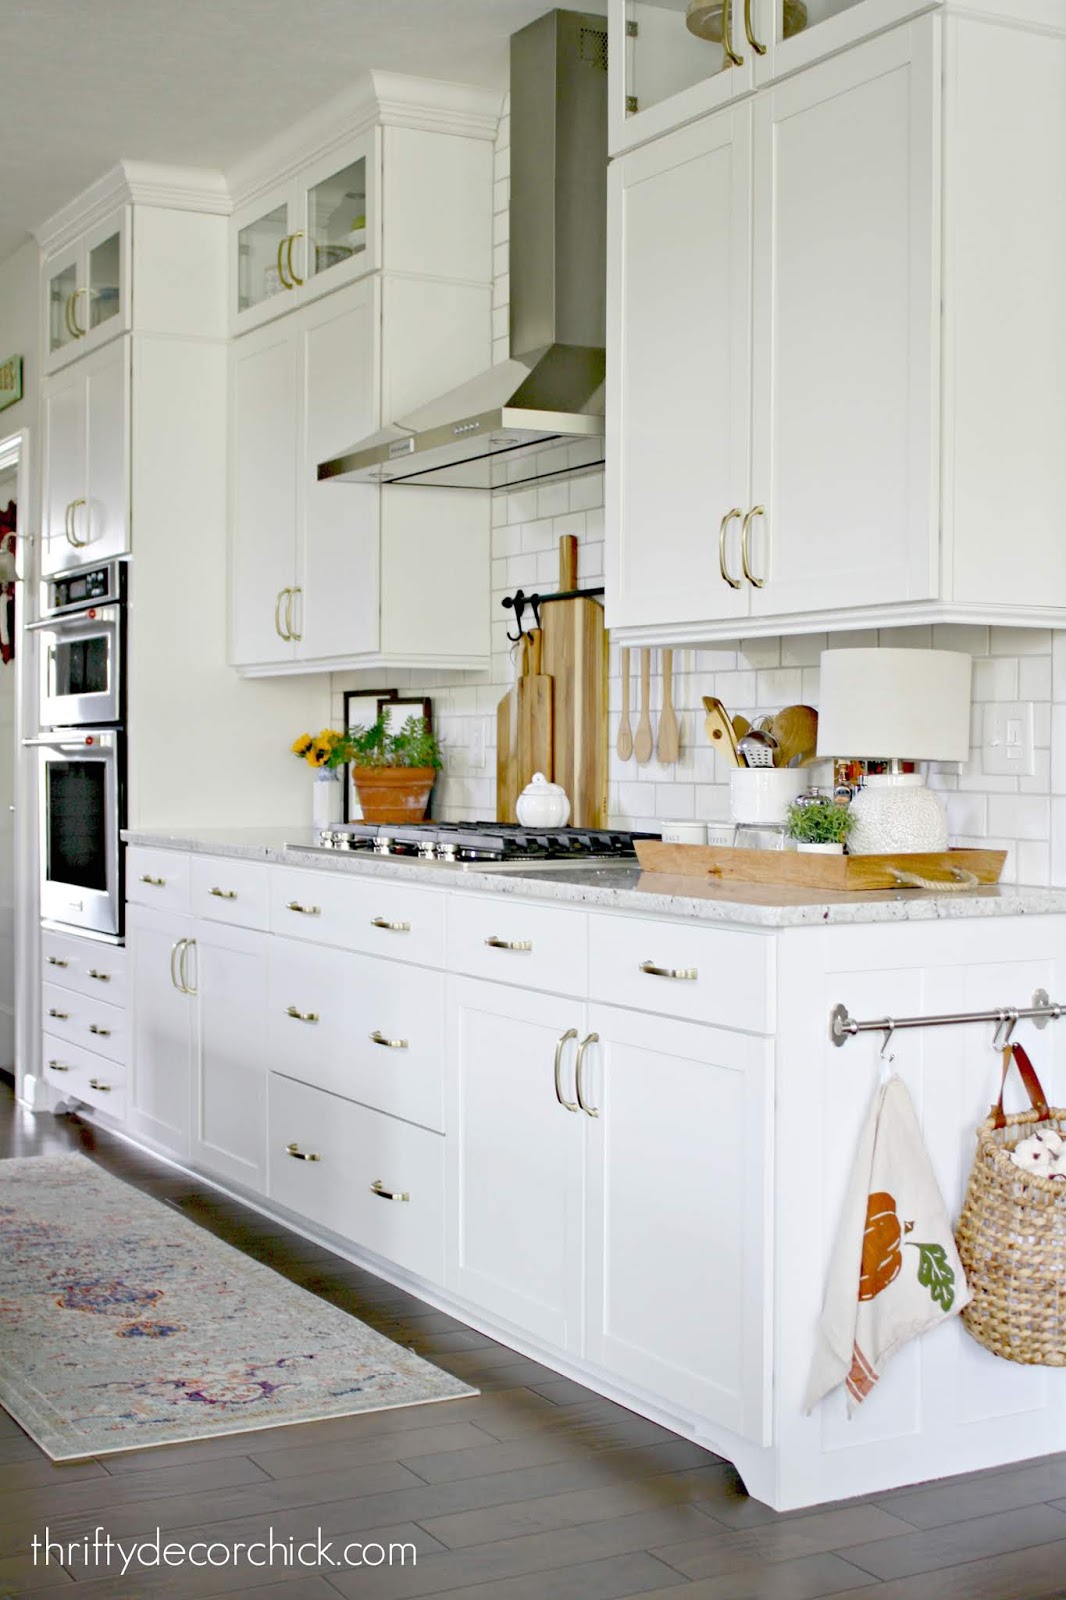 Adding small DIY details to kitchen cabinets 